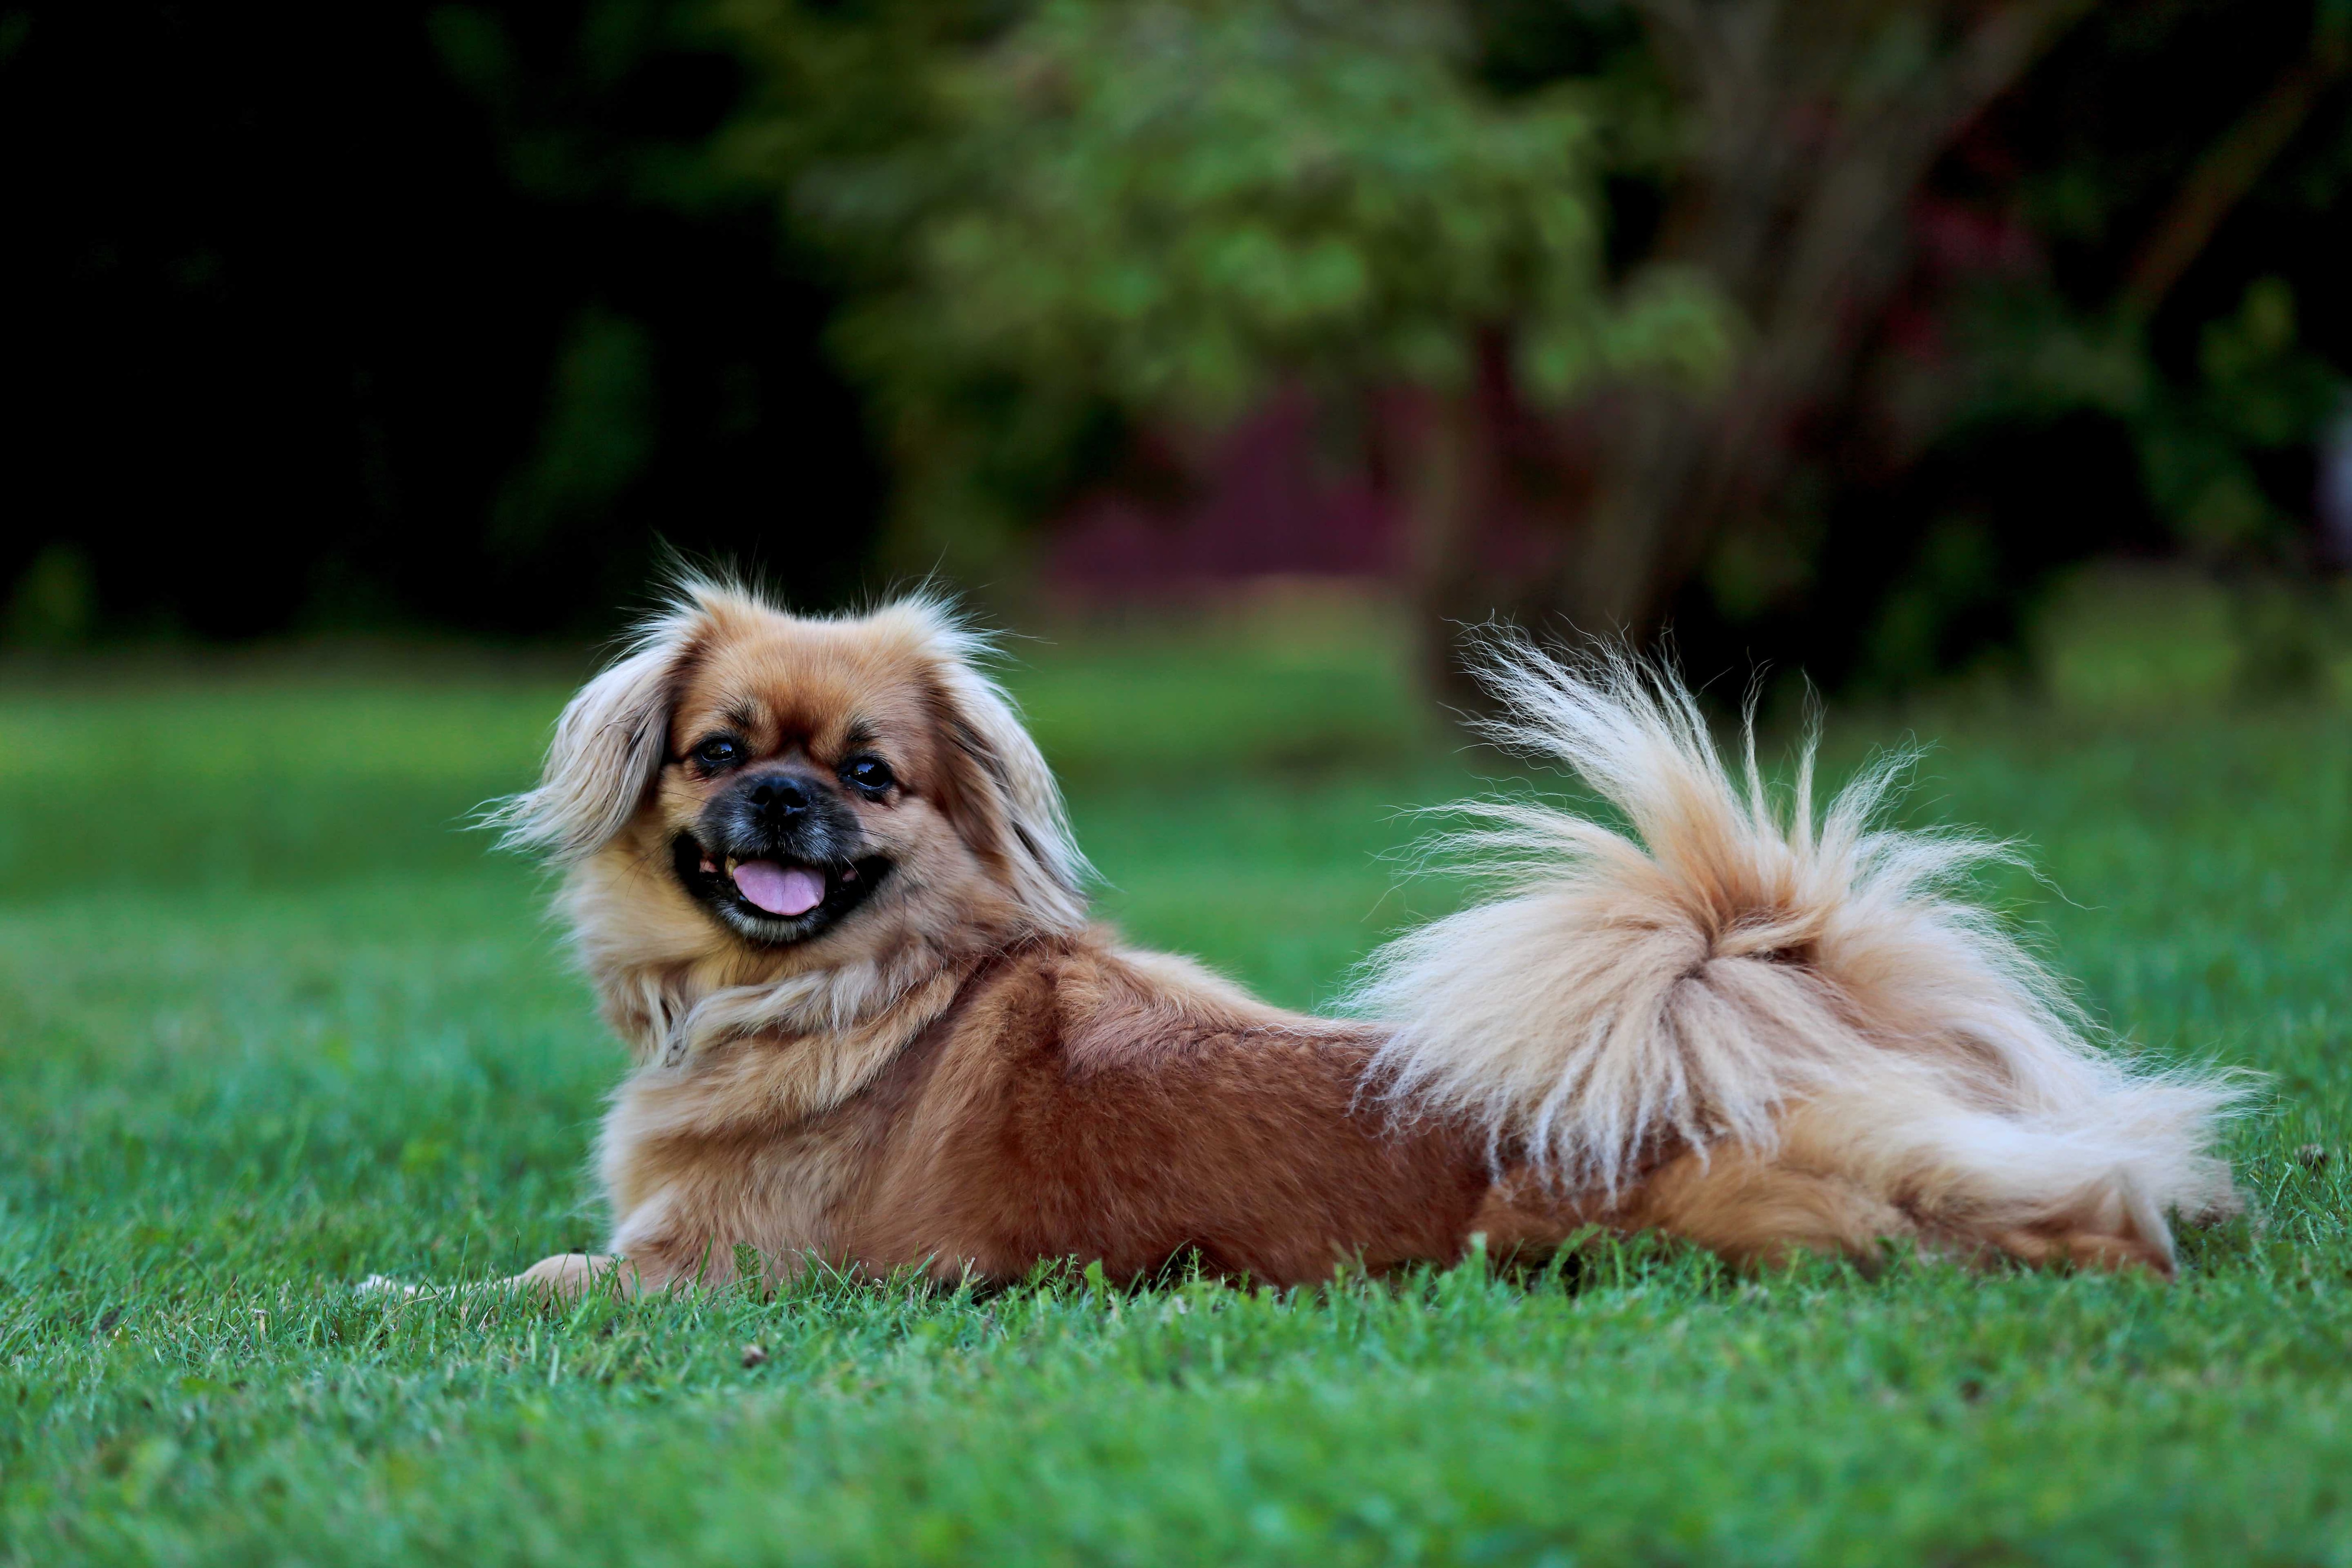 tibetan spaniel splooting in green grass and smiling at the camera